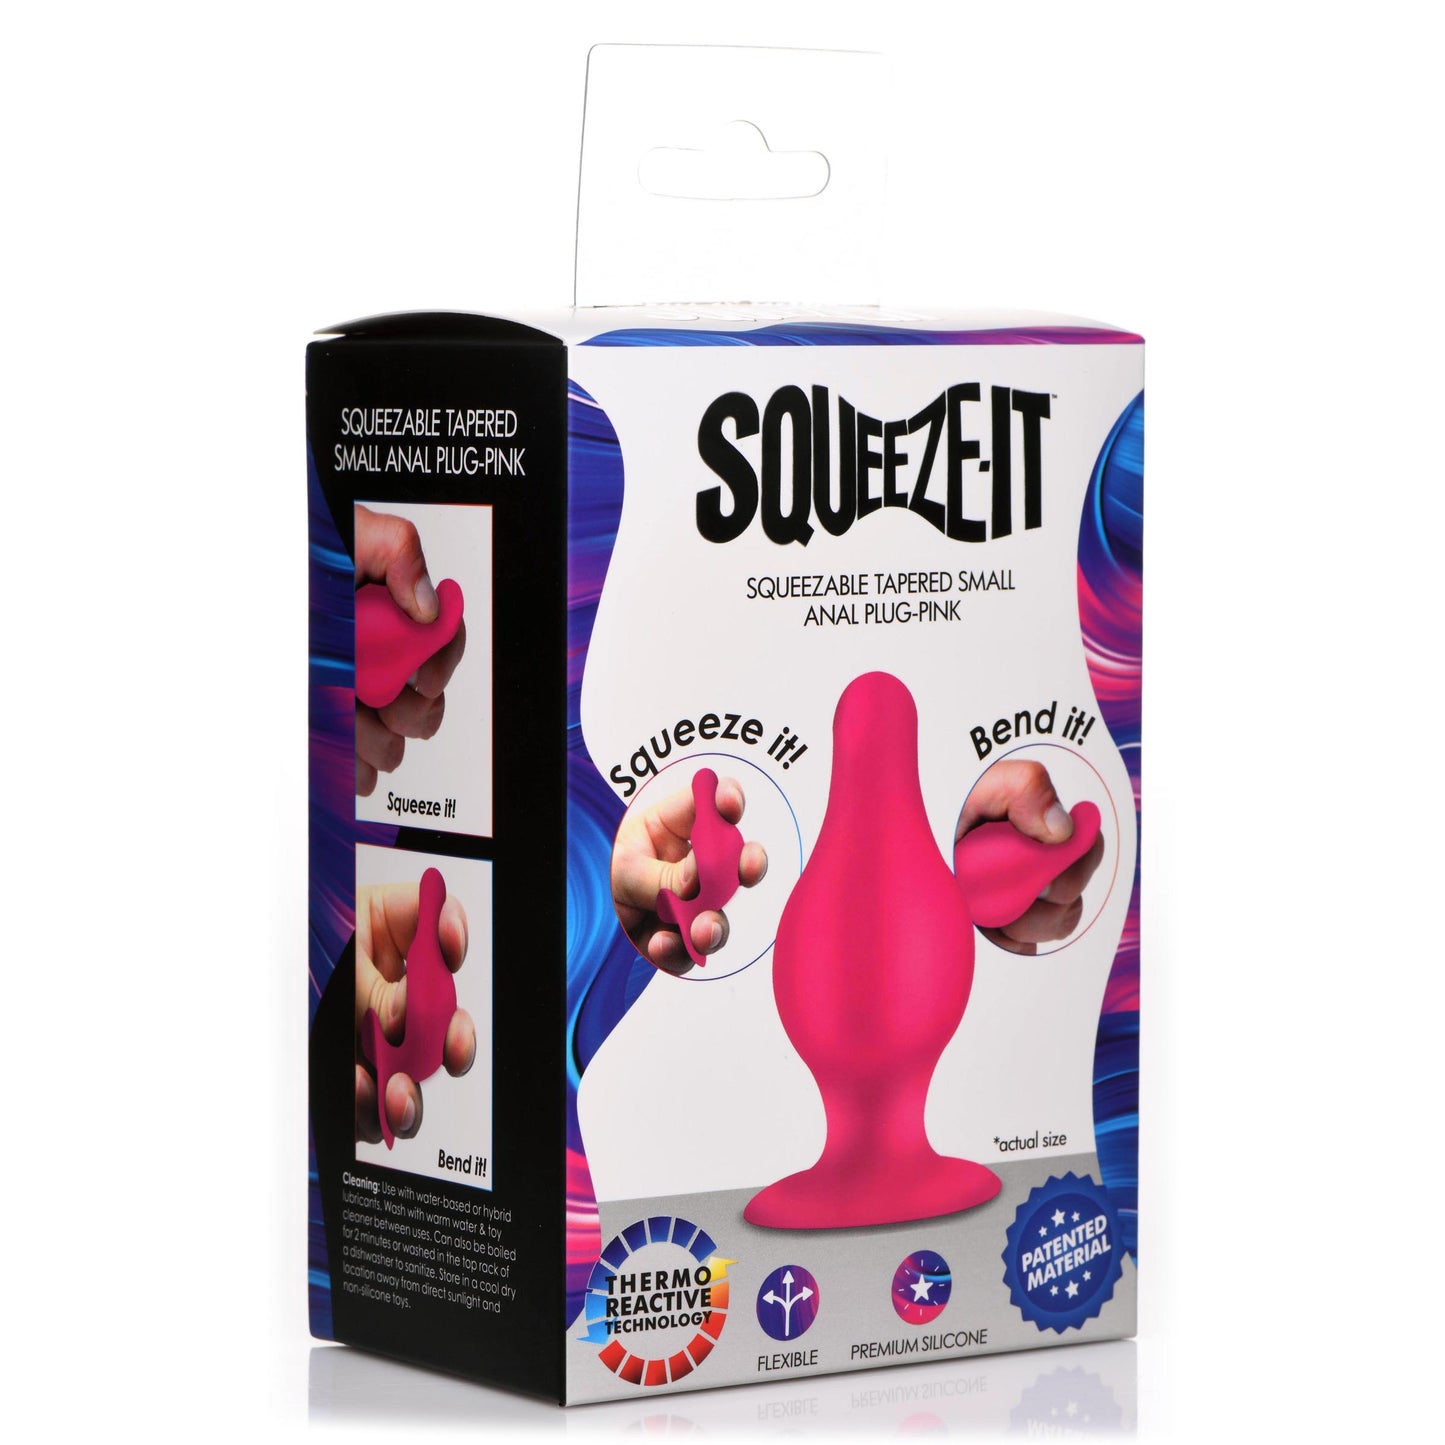 Squeezable Tapered Small Anal Plug - Pink - UABDSM